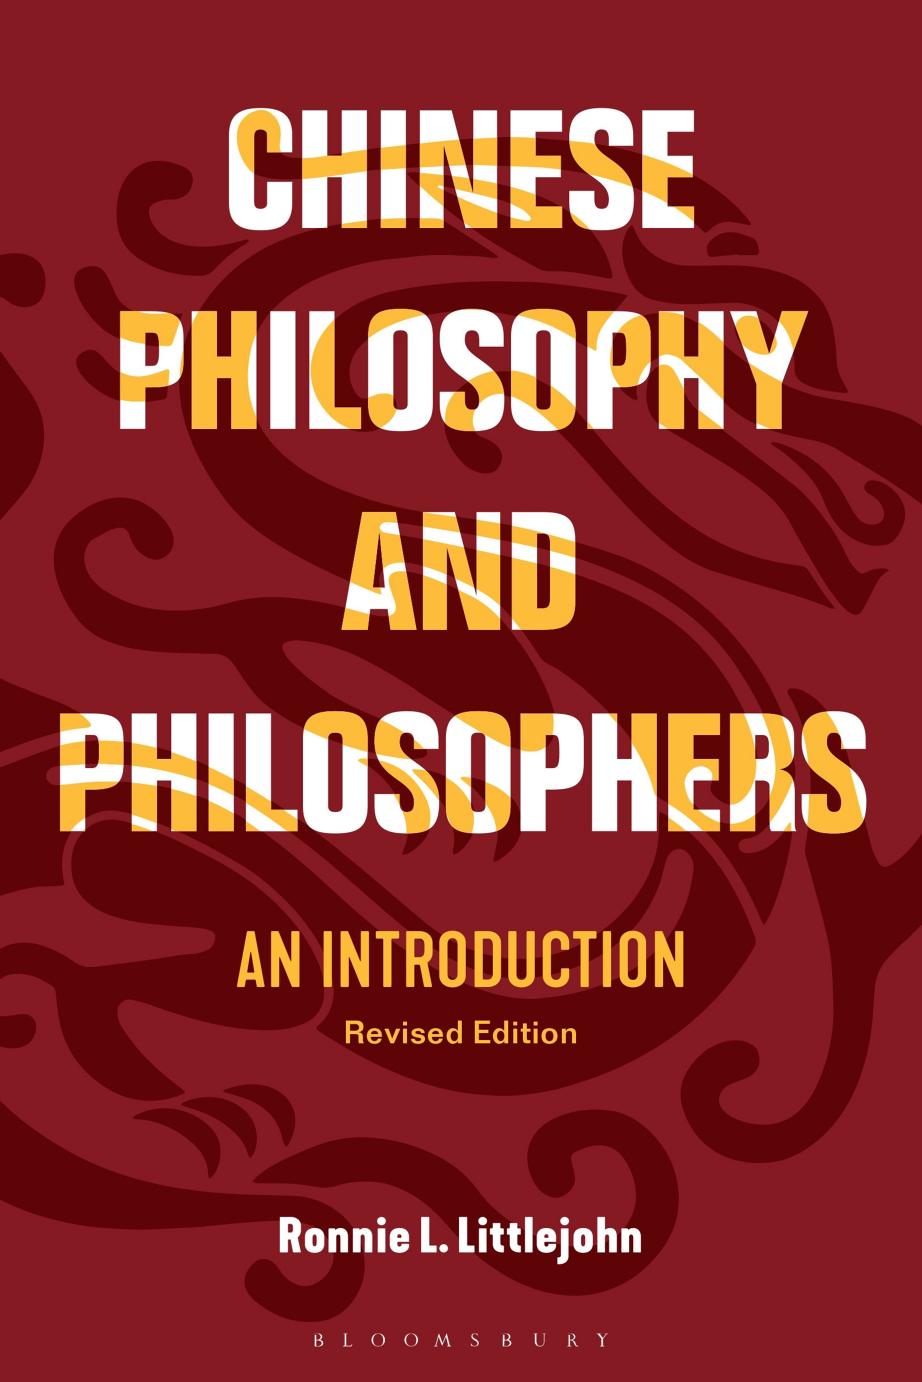 Chinese Philosophy and Philosophers: An Introduction by Ronnie L. Littlejohn